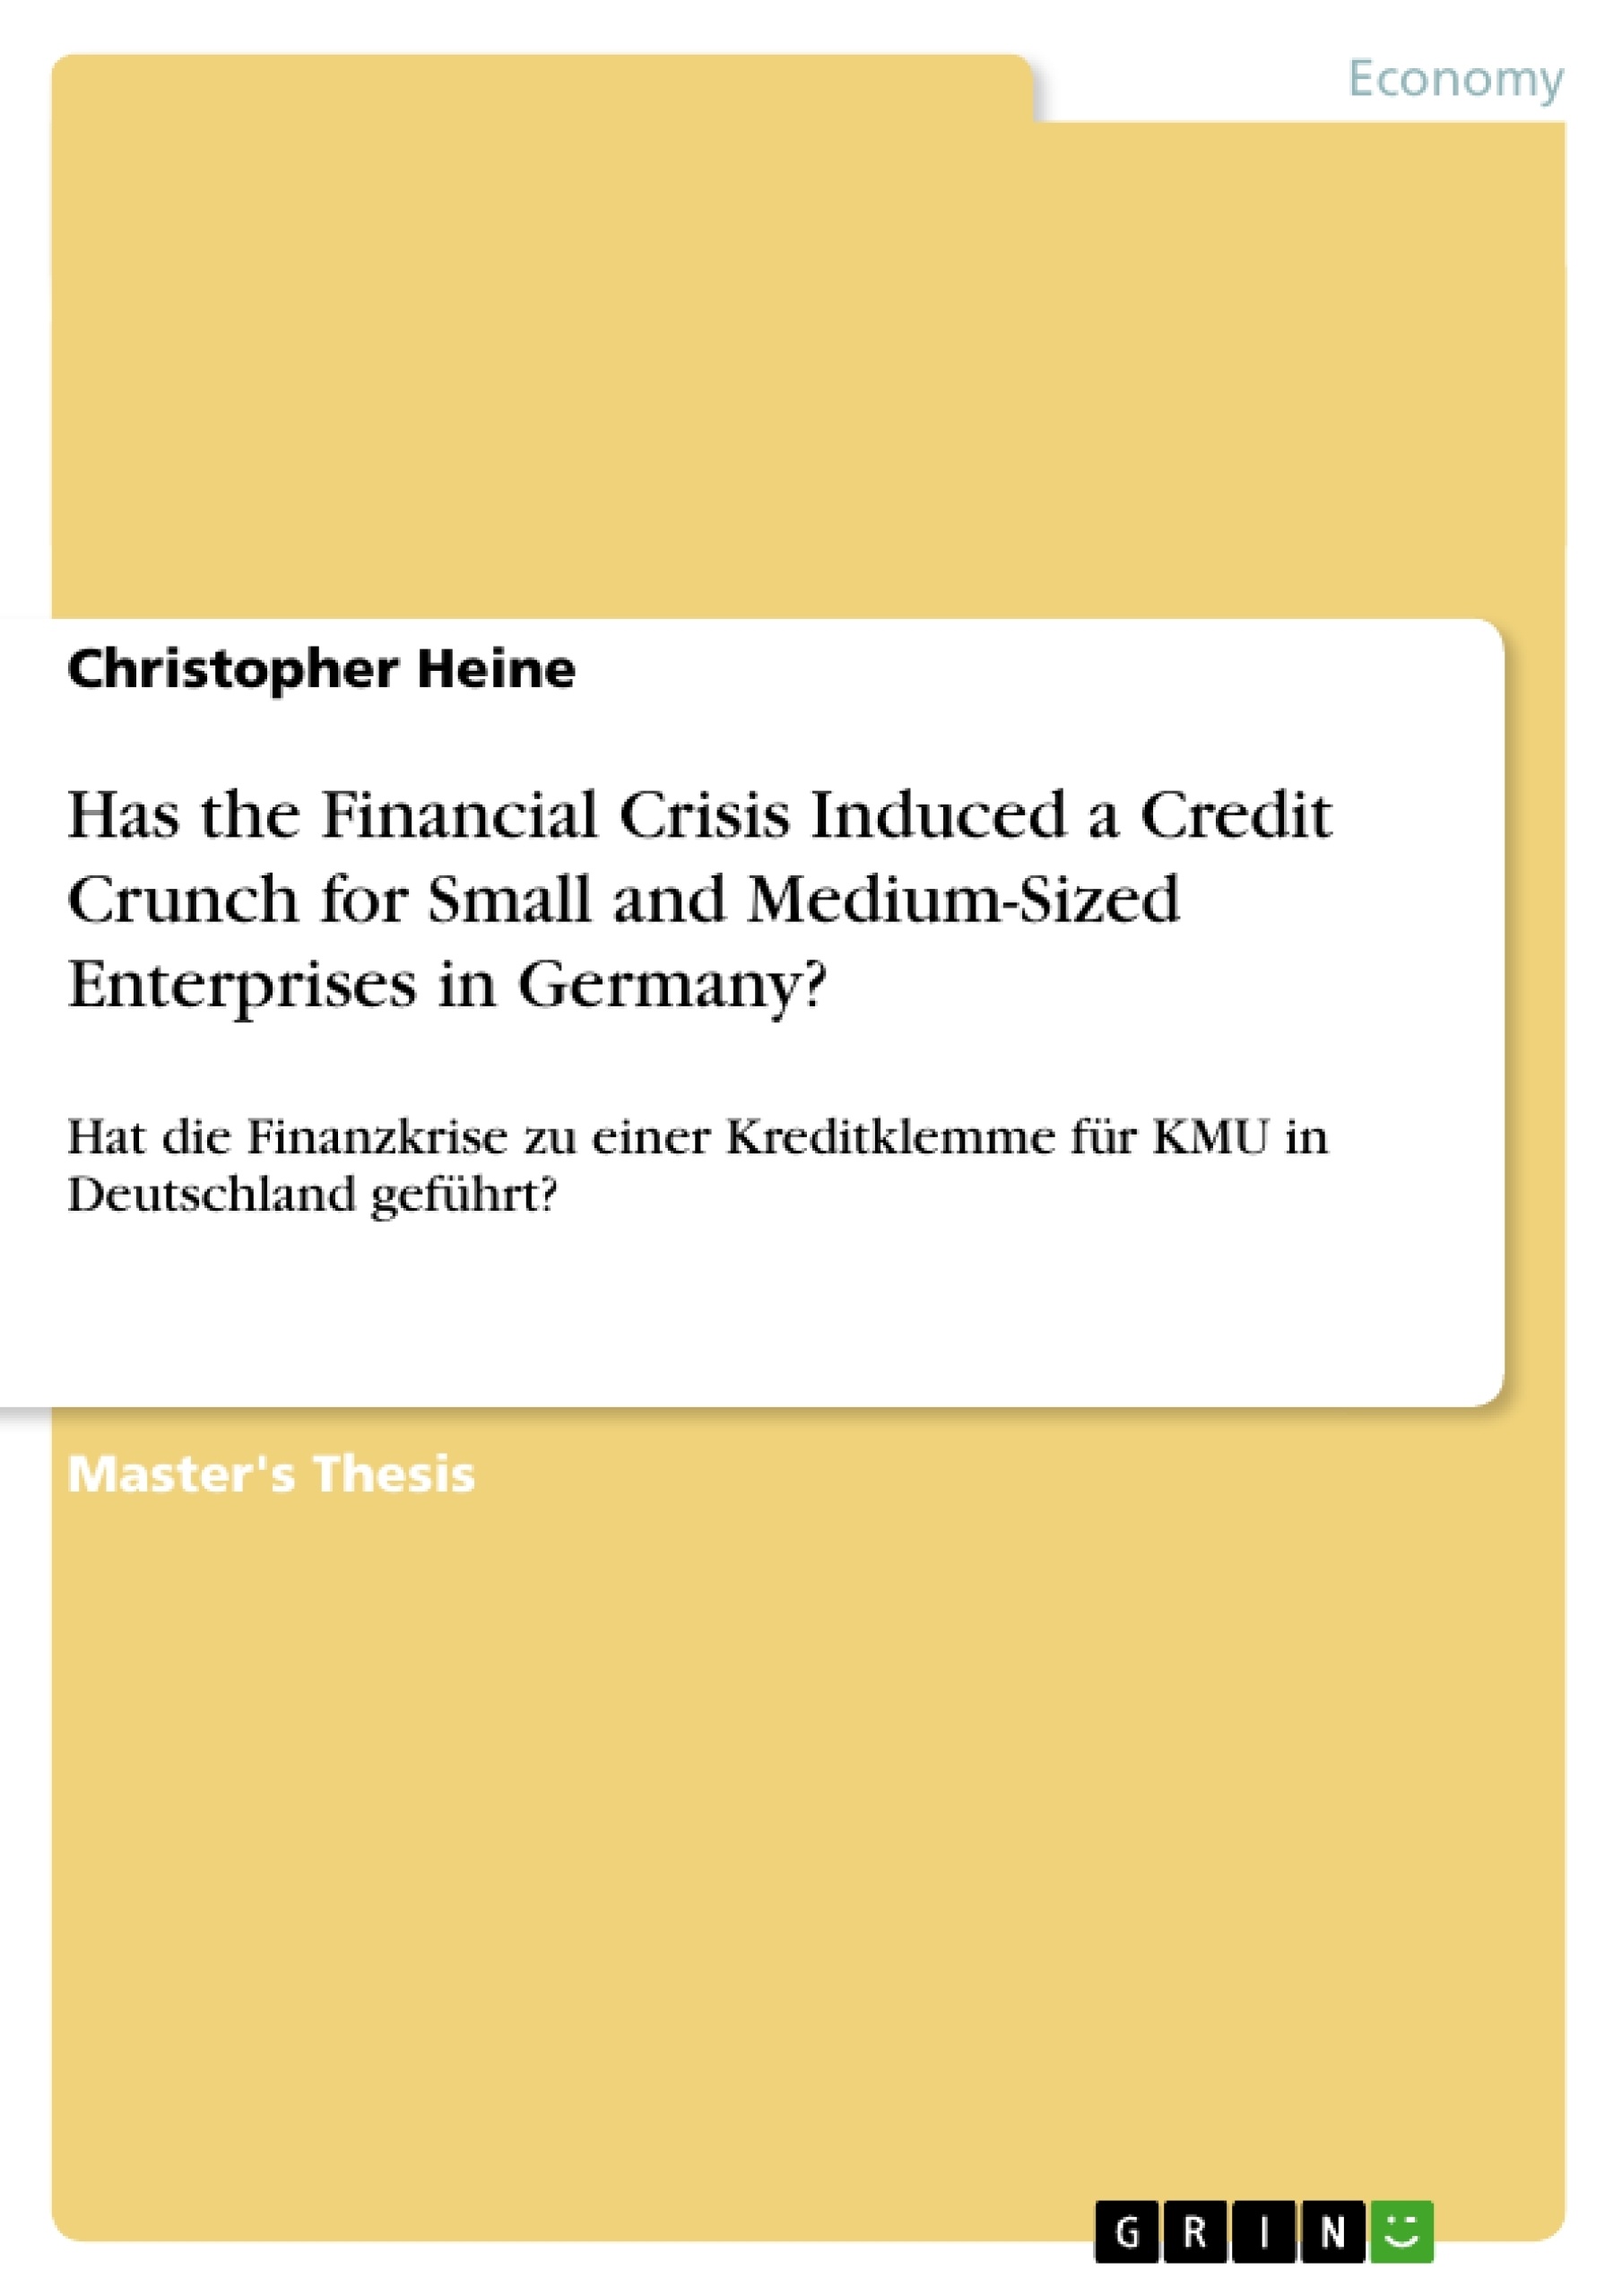 Título: Has the Financial Crisis Induced a Credit Crunch for Small and Medium-Sized Enterprises in Germany?